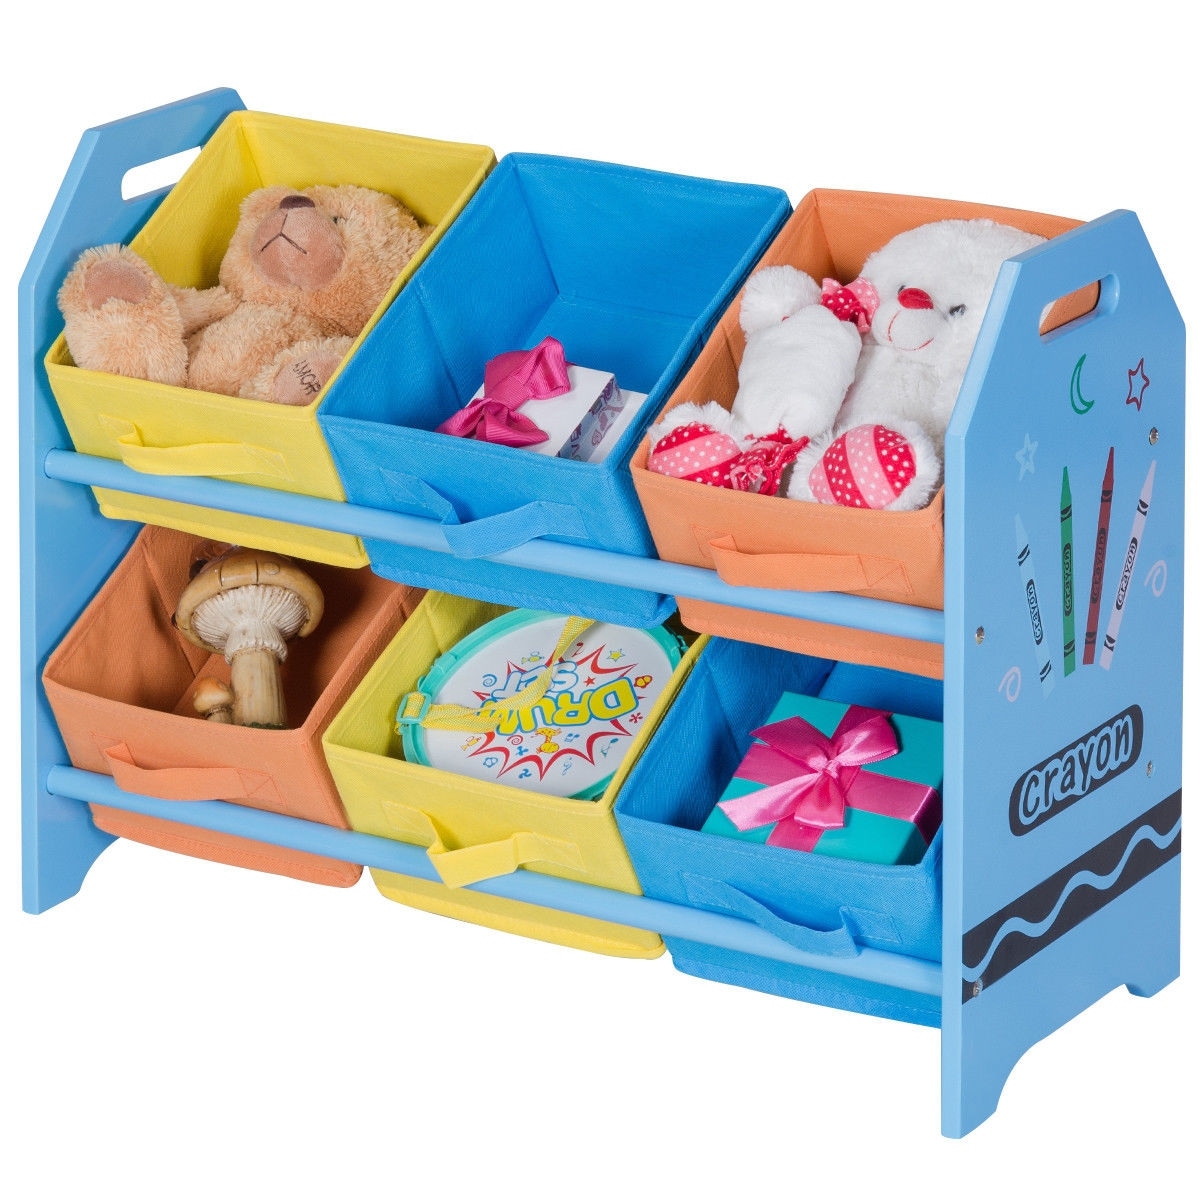 toy bins for toddlers